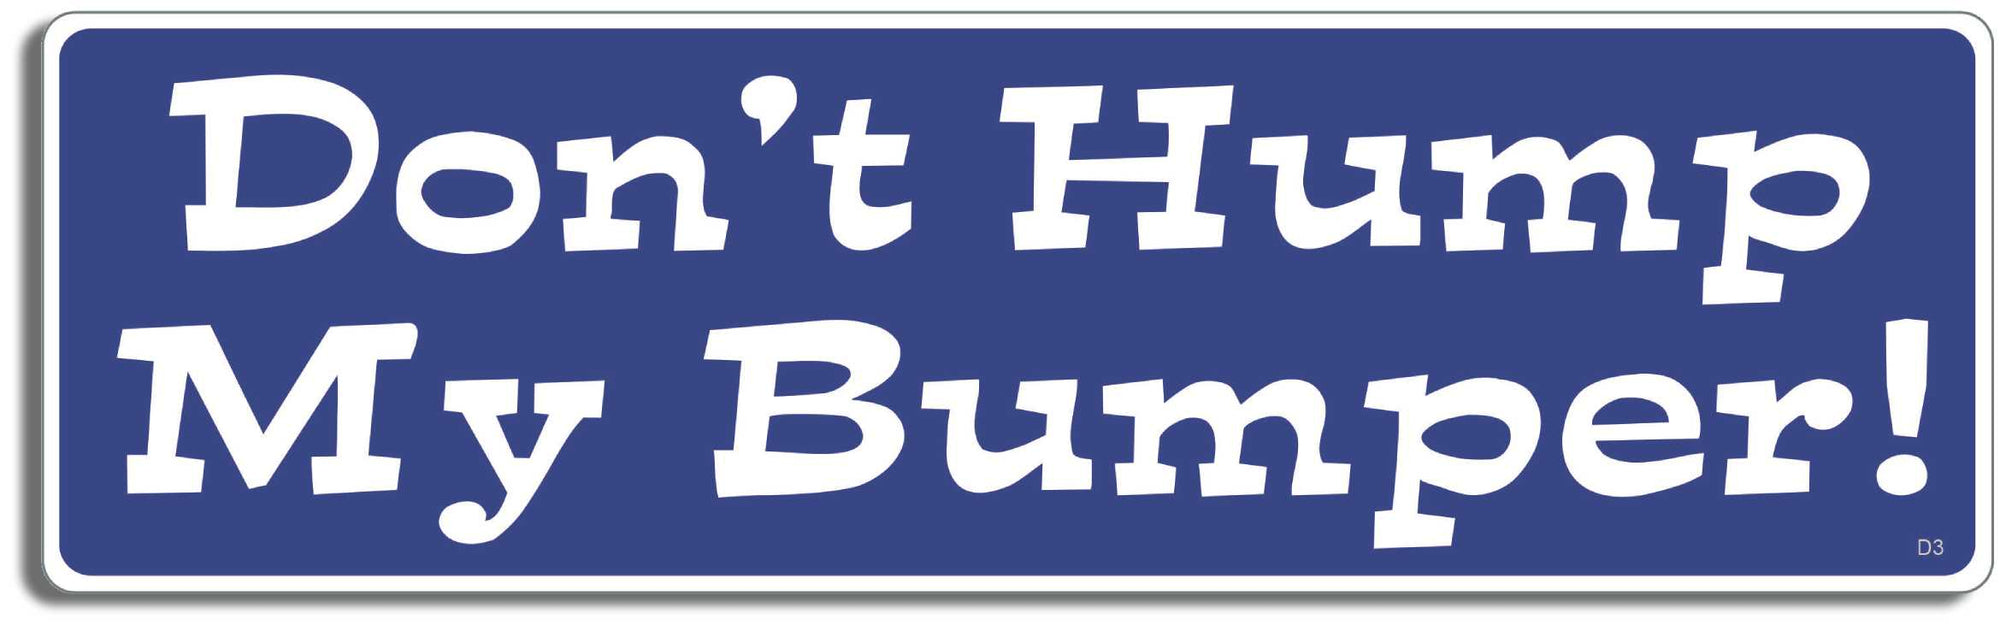 Don't hump my bumper - 3" x 10" Bumper Sticker--Car Magnet- -  Decal Bumper Sticker-funny Bumper Sticker Car Magnet Don't hump my -  Decal for carsdrive safely, Driving, Funny, safe driving, tailgaters, tailgating